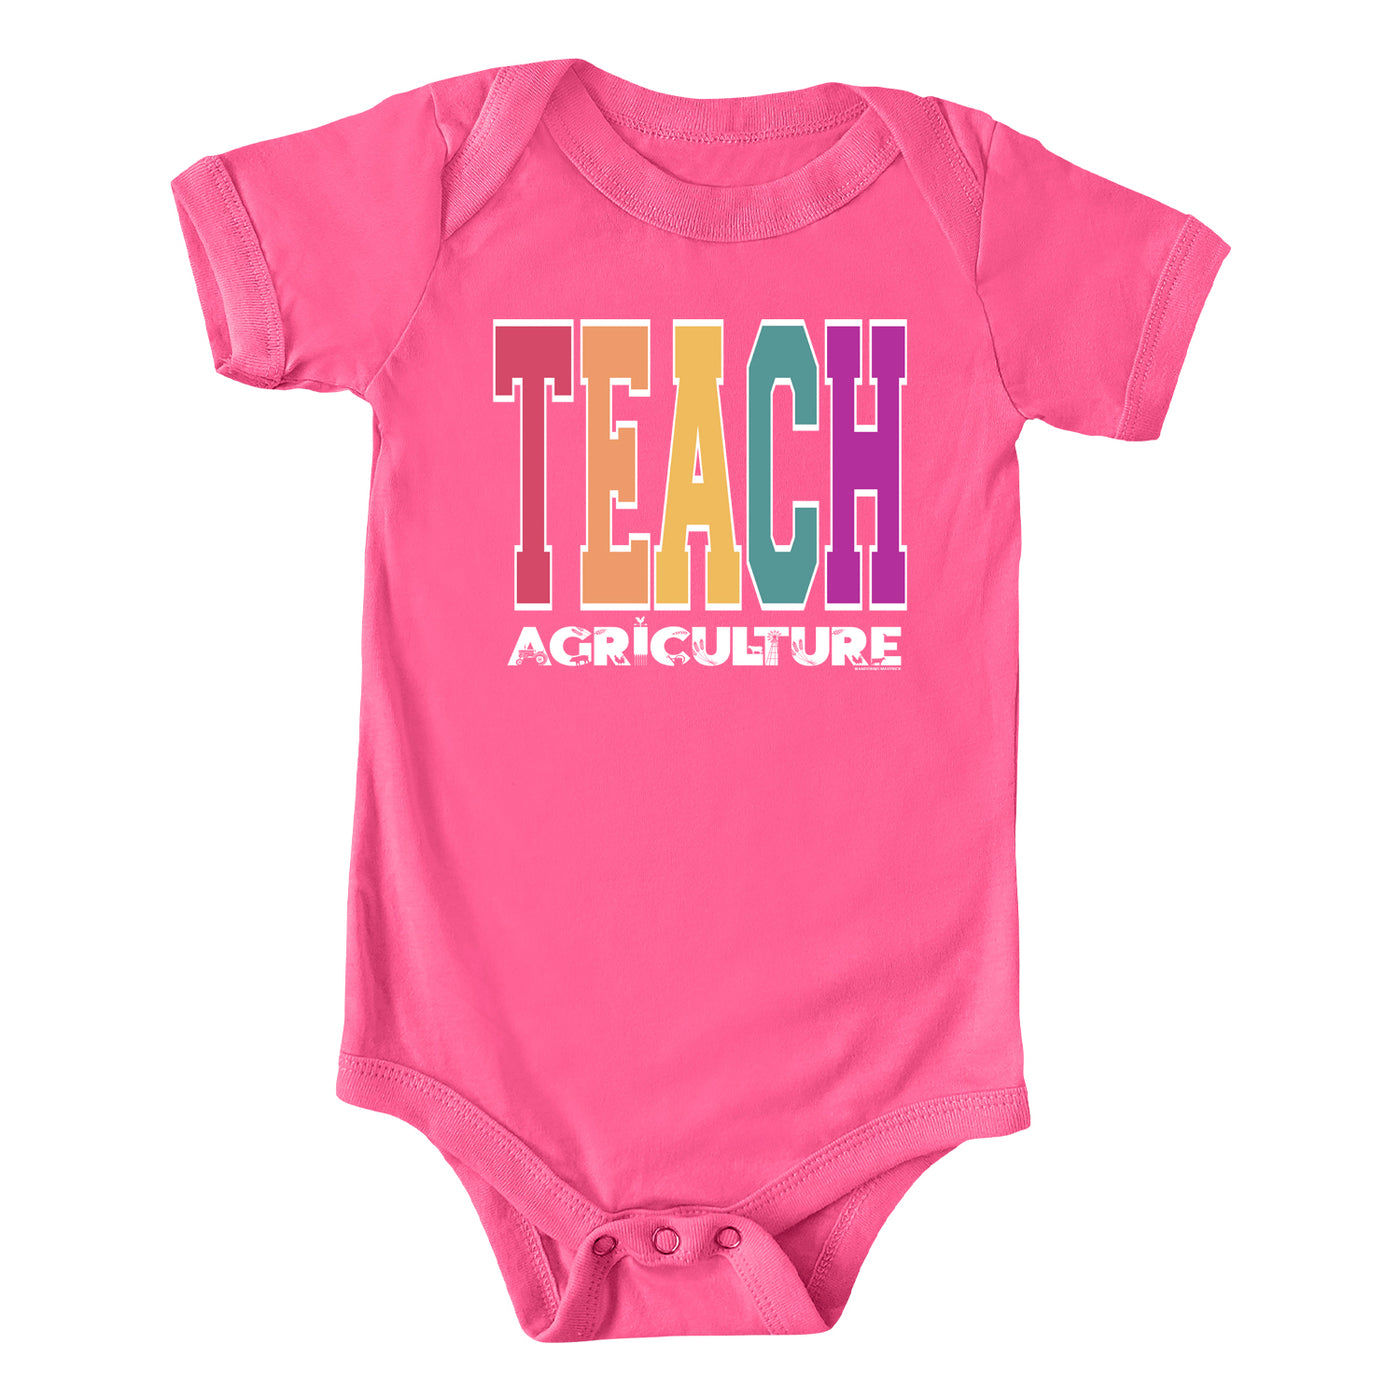 Colorful Teach Agriculture One Piece/T-Shirt (Newborn - Youth XL) - Multiple Colors!